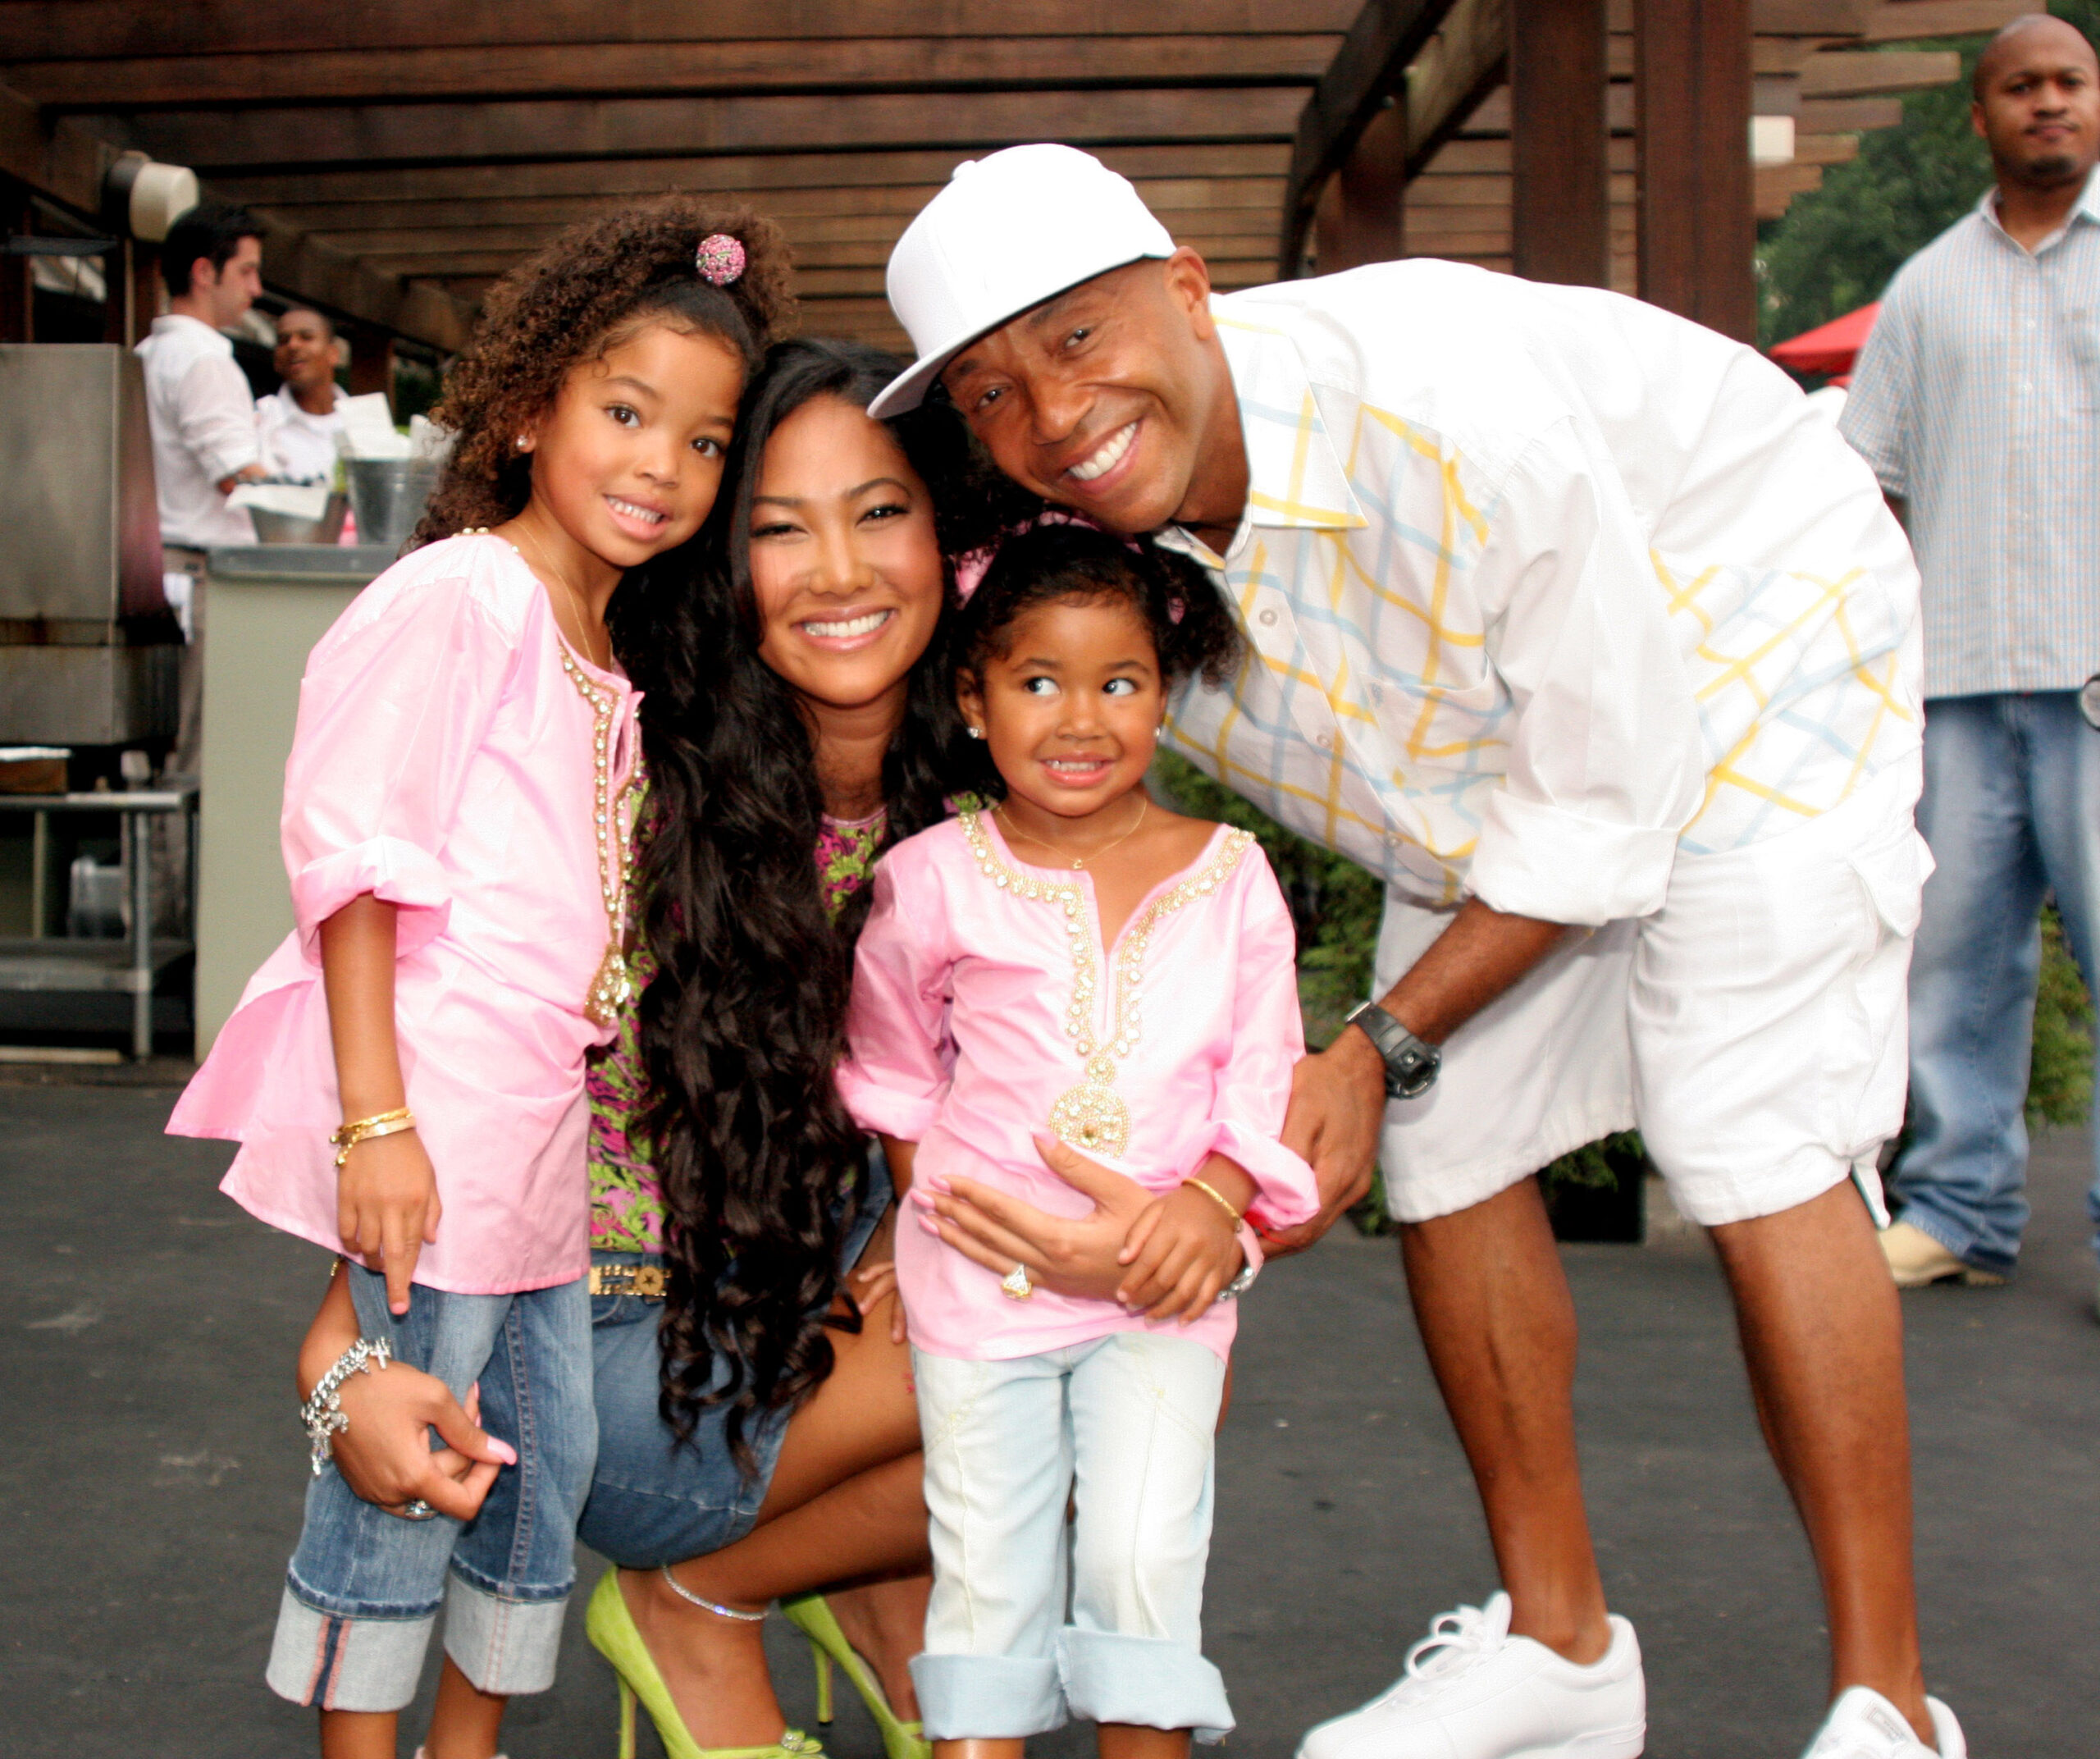 Where Does Russell Simmons Live? pictured: Russell Simmons, Kimora Lee and their daughters